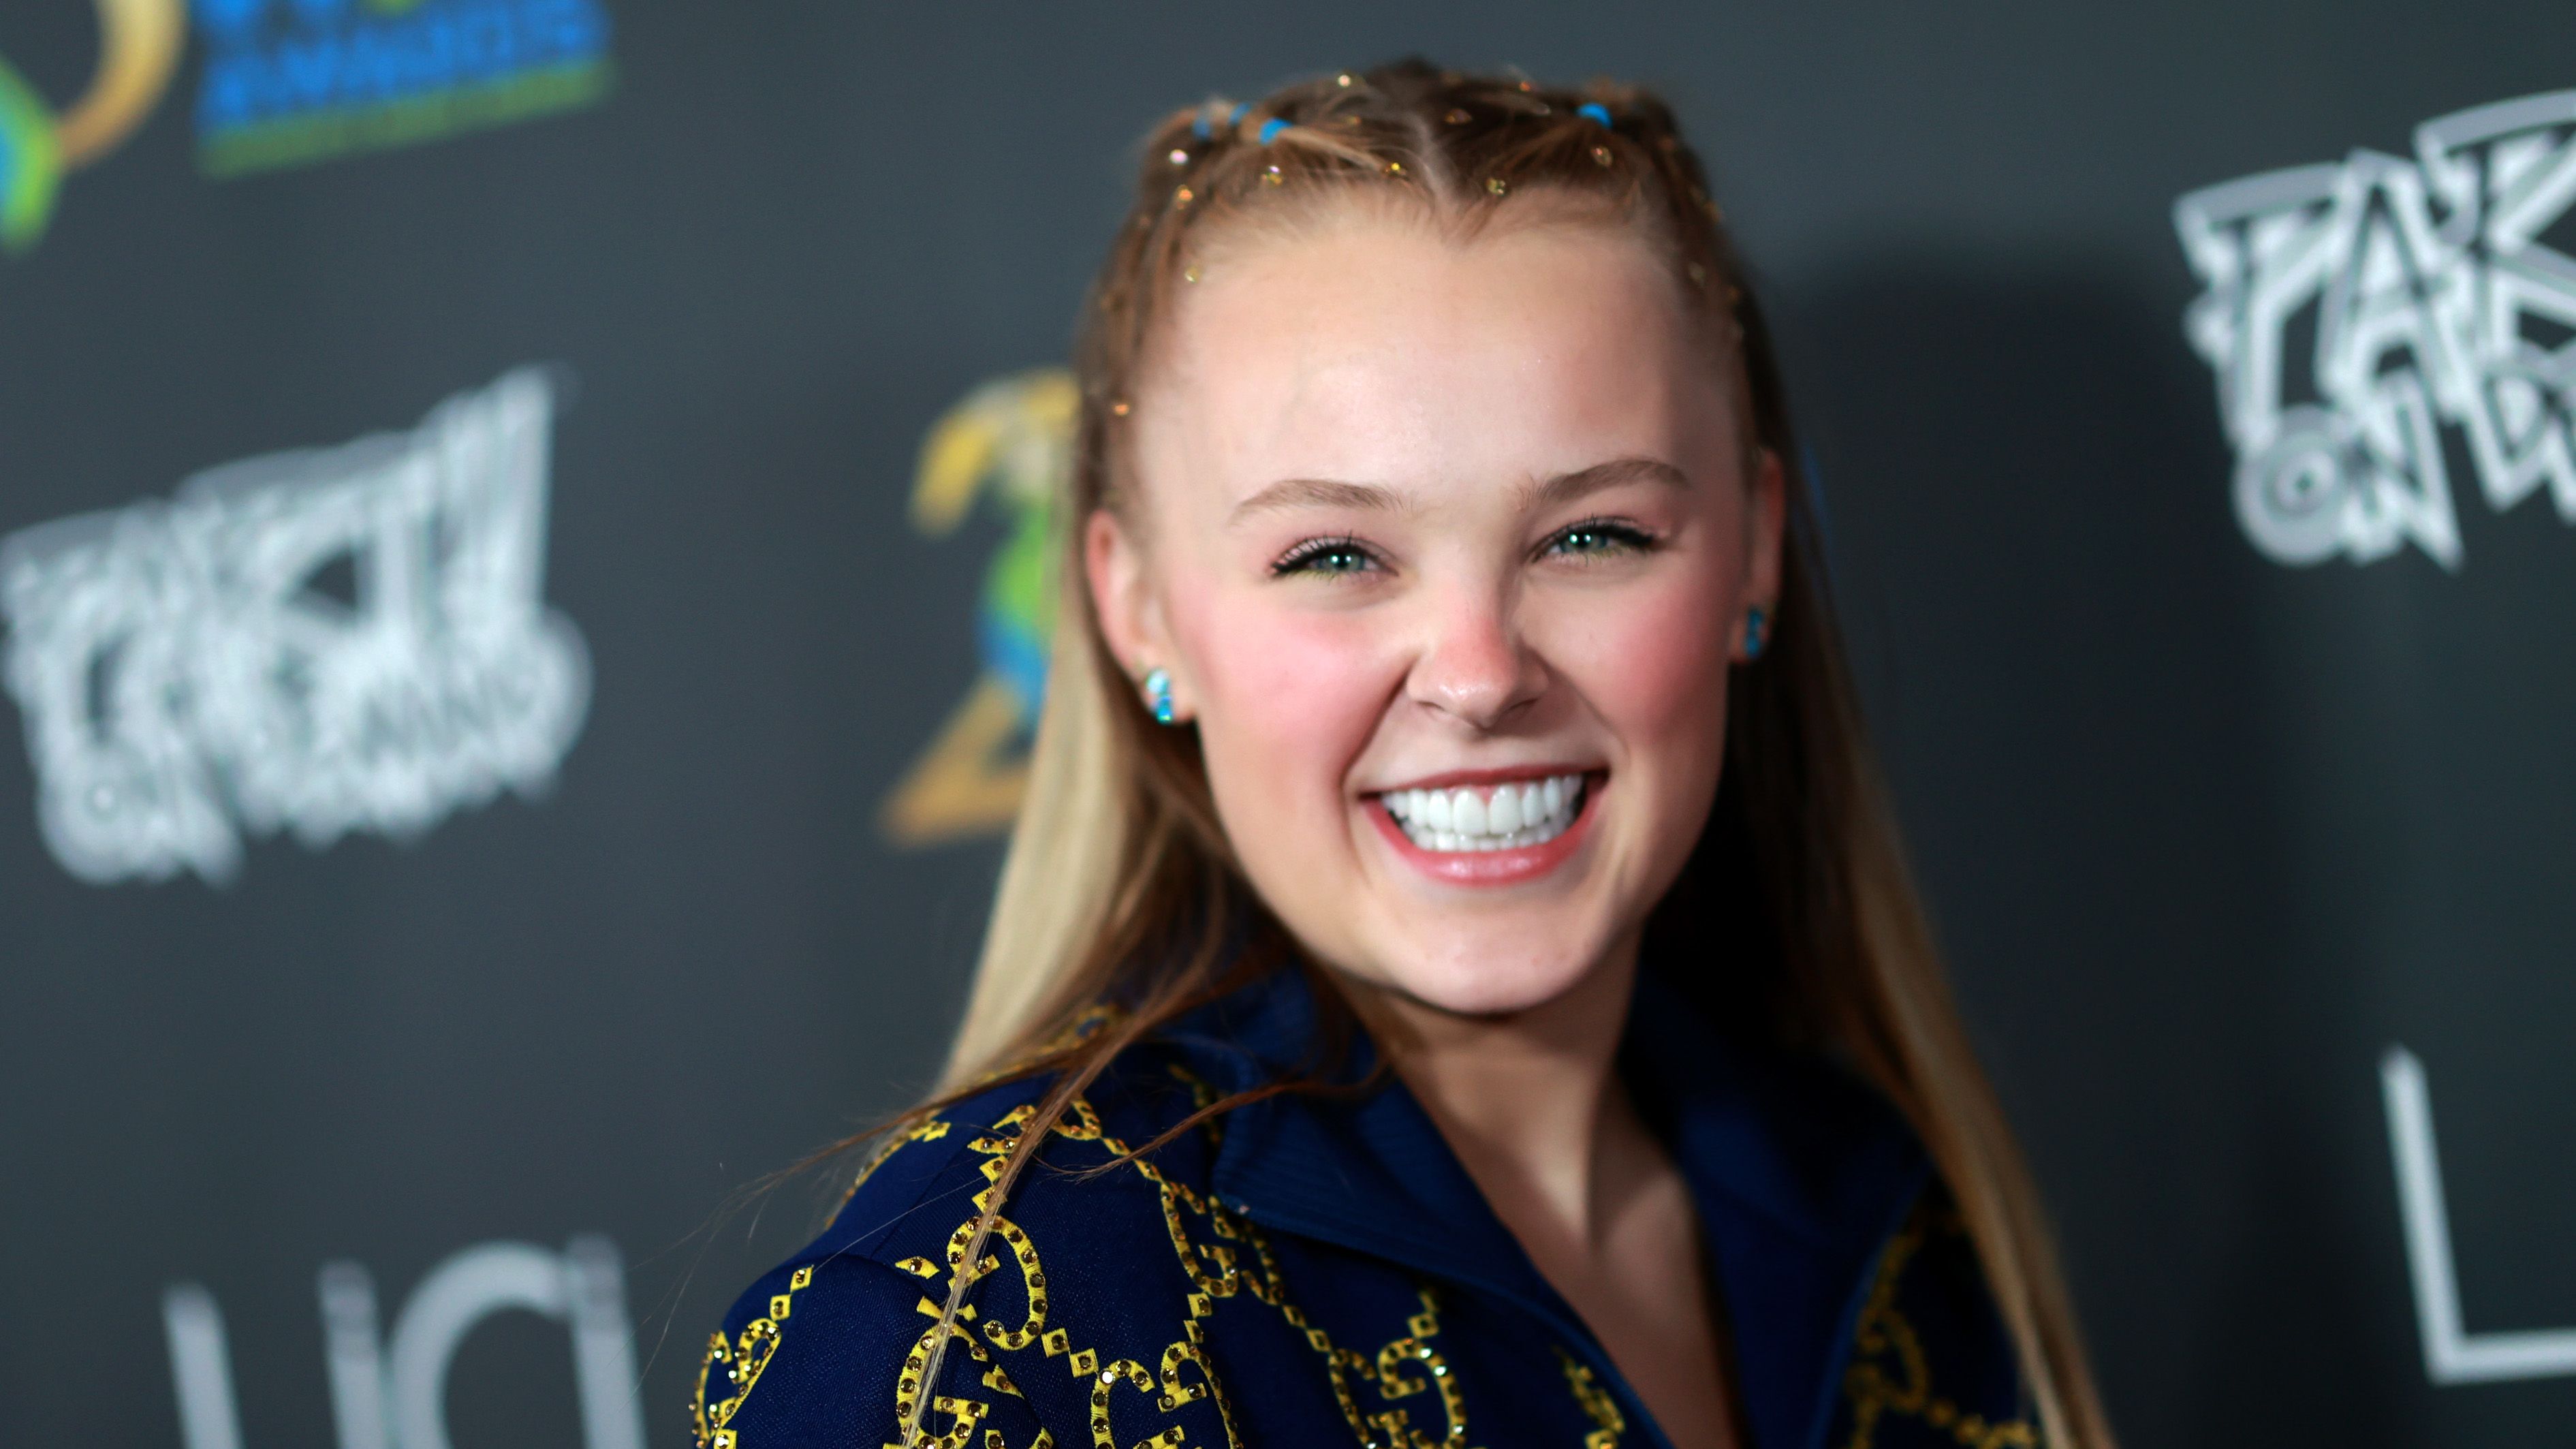 https://hips.hearstapps.com/hmg-prod/images/jojo-siwa-attends-the-23rd-womens-images-awards-presented-news-photo-1654288257.jpg?crop=1xw:0.84386xh;center,top